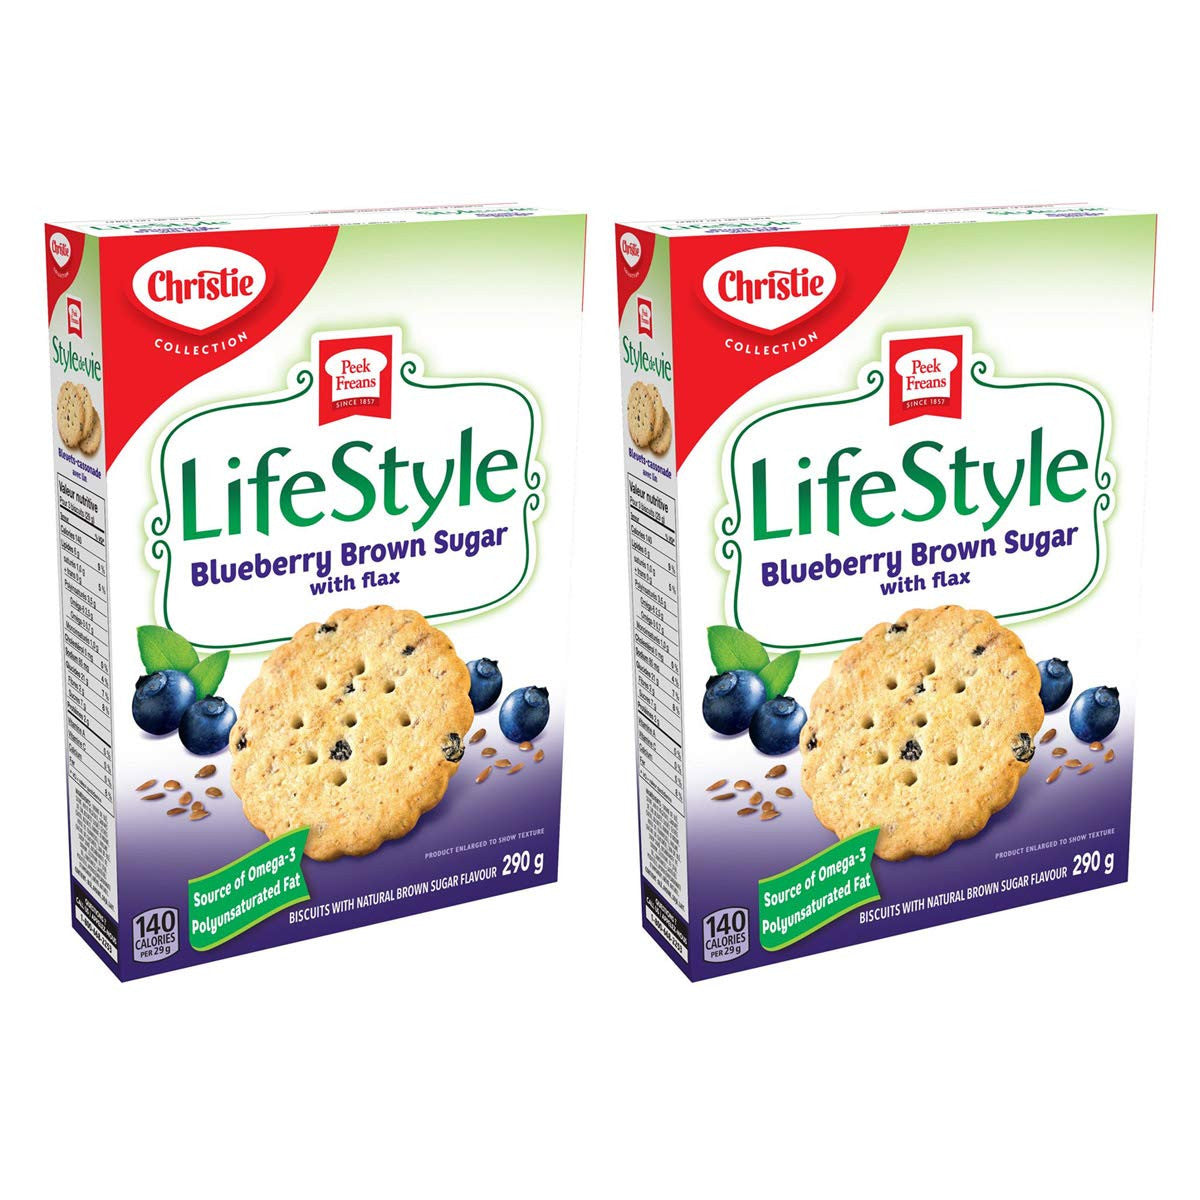 Peek Freans Lifestyle Blueberry Brown Sugar with Flax Cookies 290g/10.2 oz., 2pk {Imported from Canada}